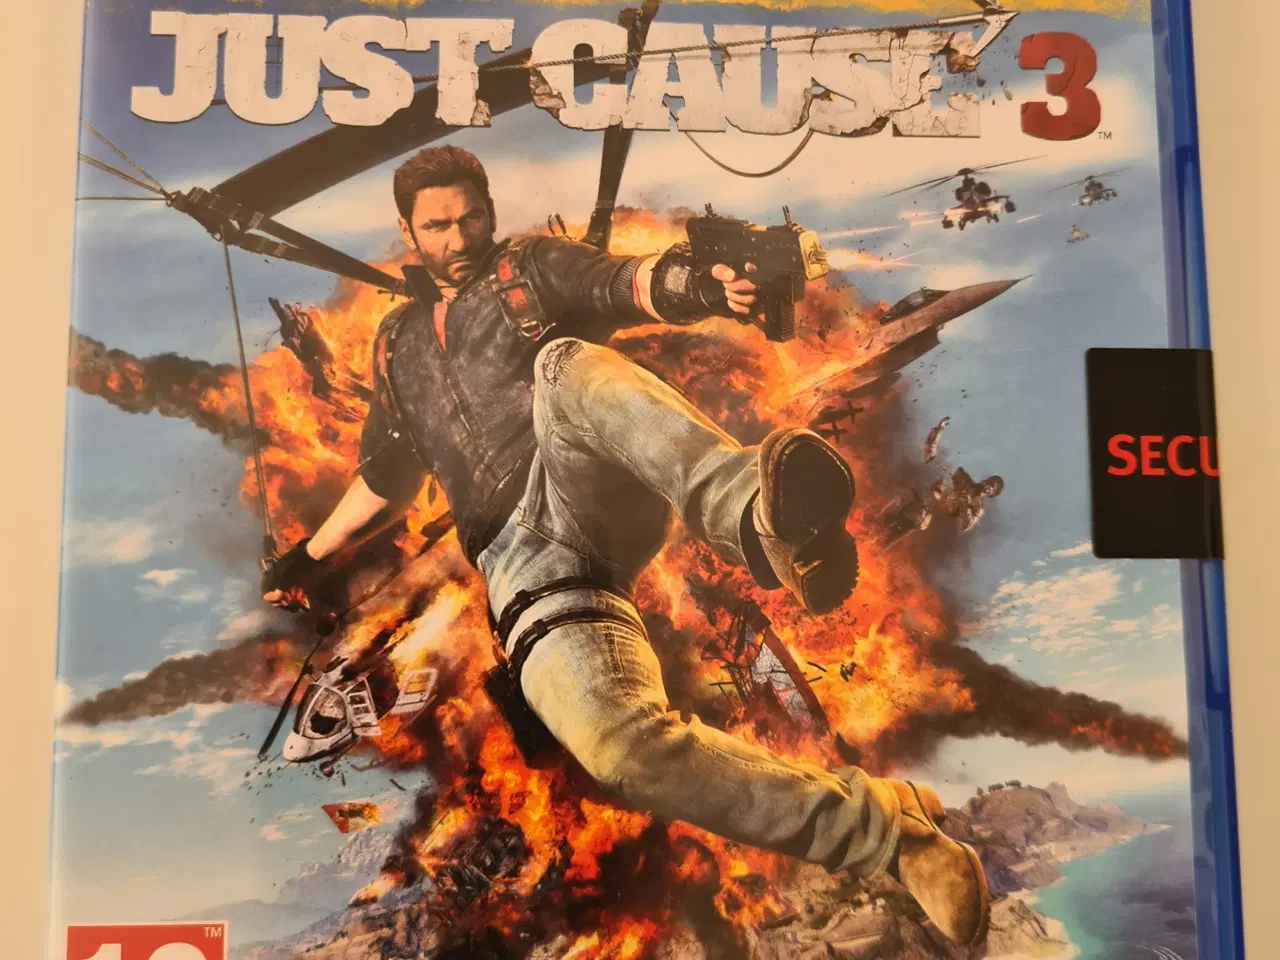 Billede 1 - Ps4 Just Cause 3 NY